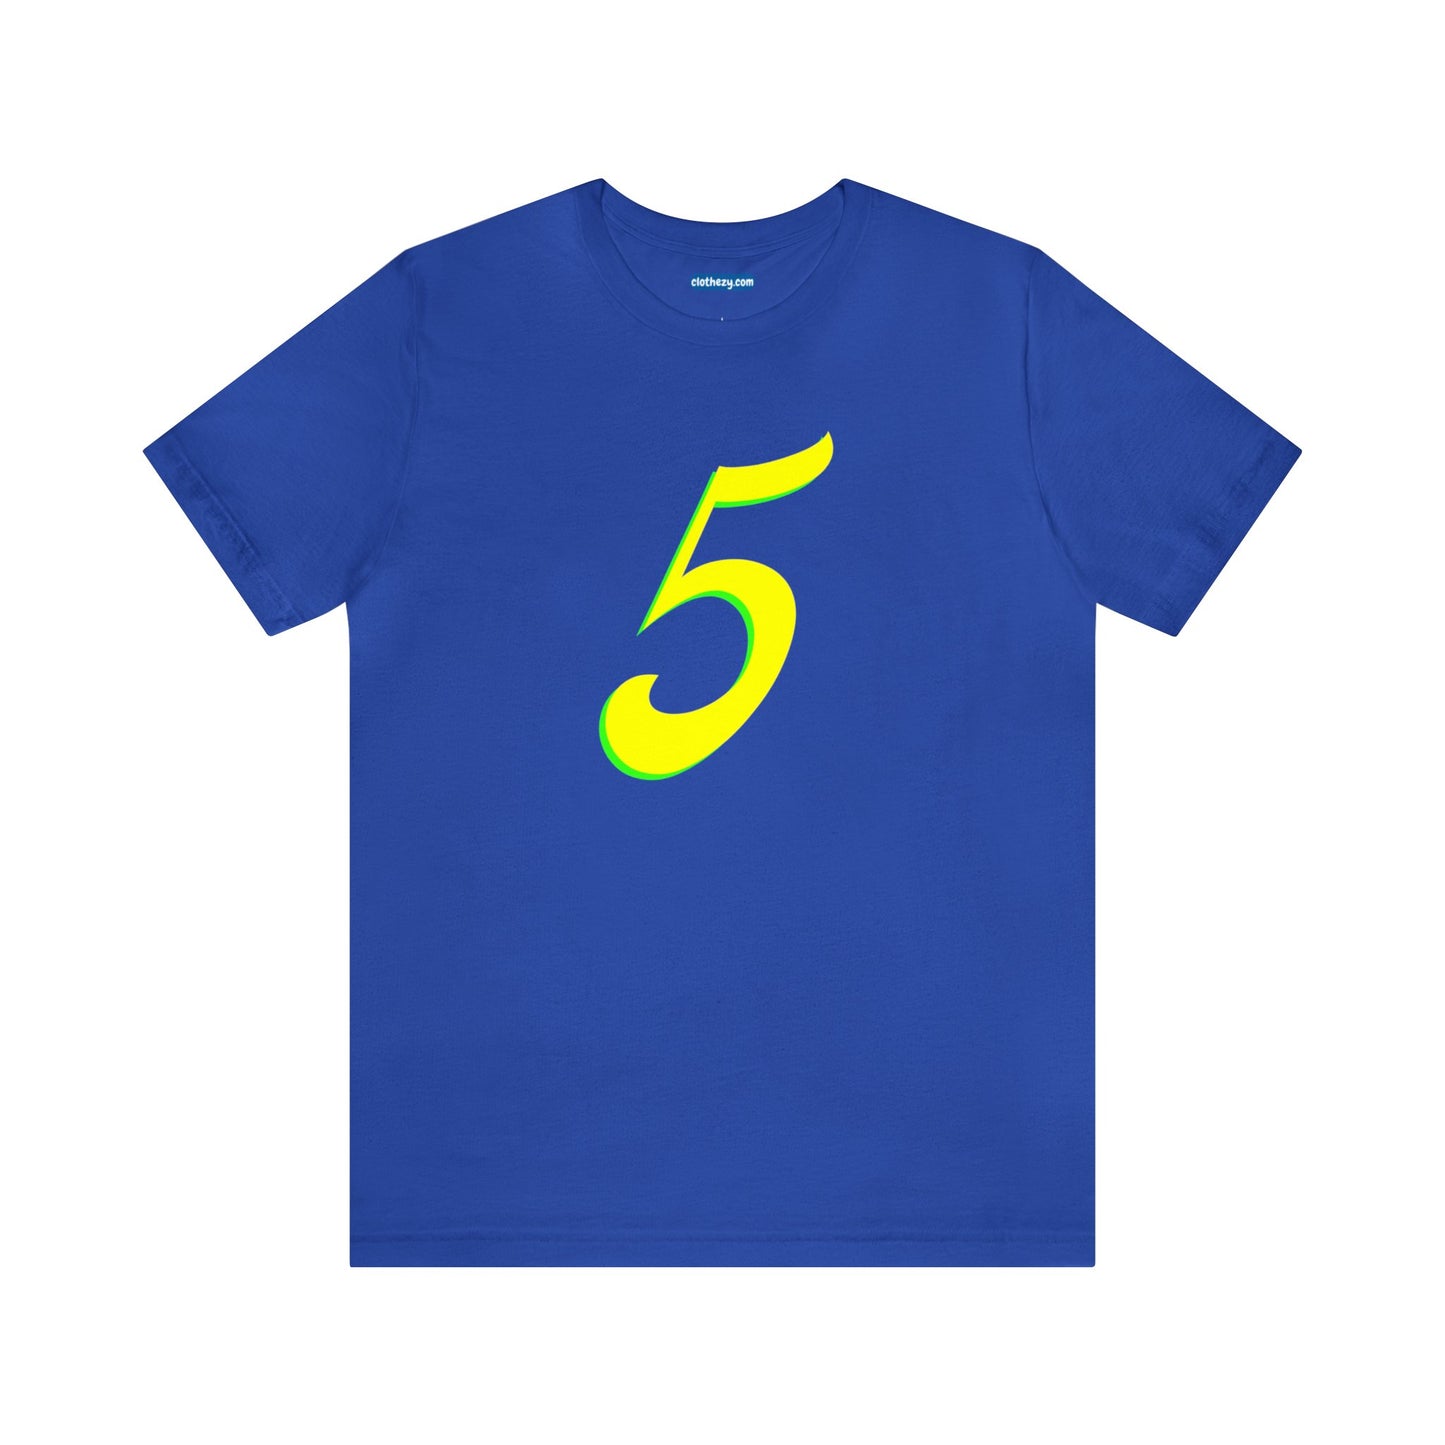 Number 5 Design - Soft Cotton Tee for birthdays and celebrations, Gift for friends and family, Multiple Options by clothezy.com in Royal Blue Size Small - Buy Now